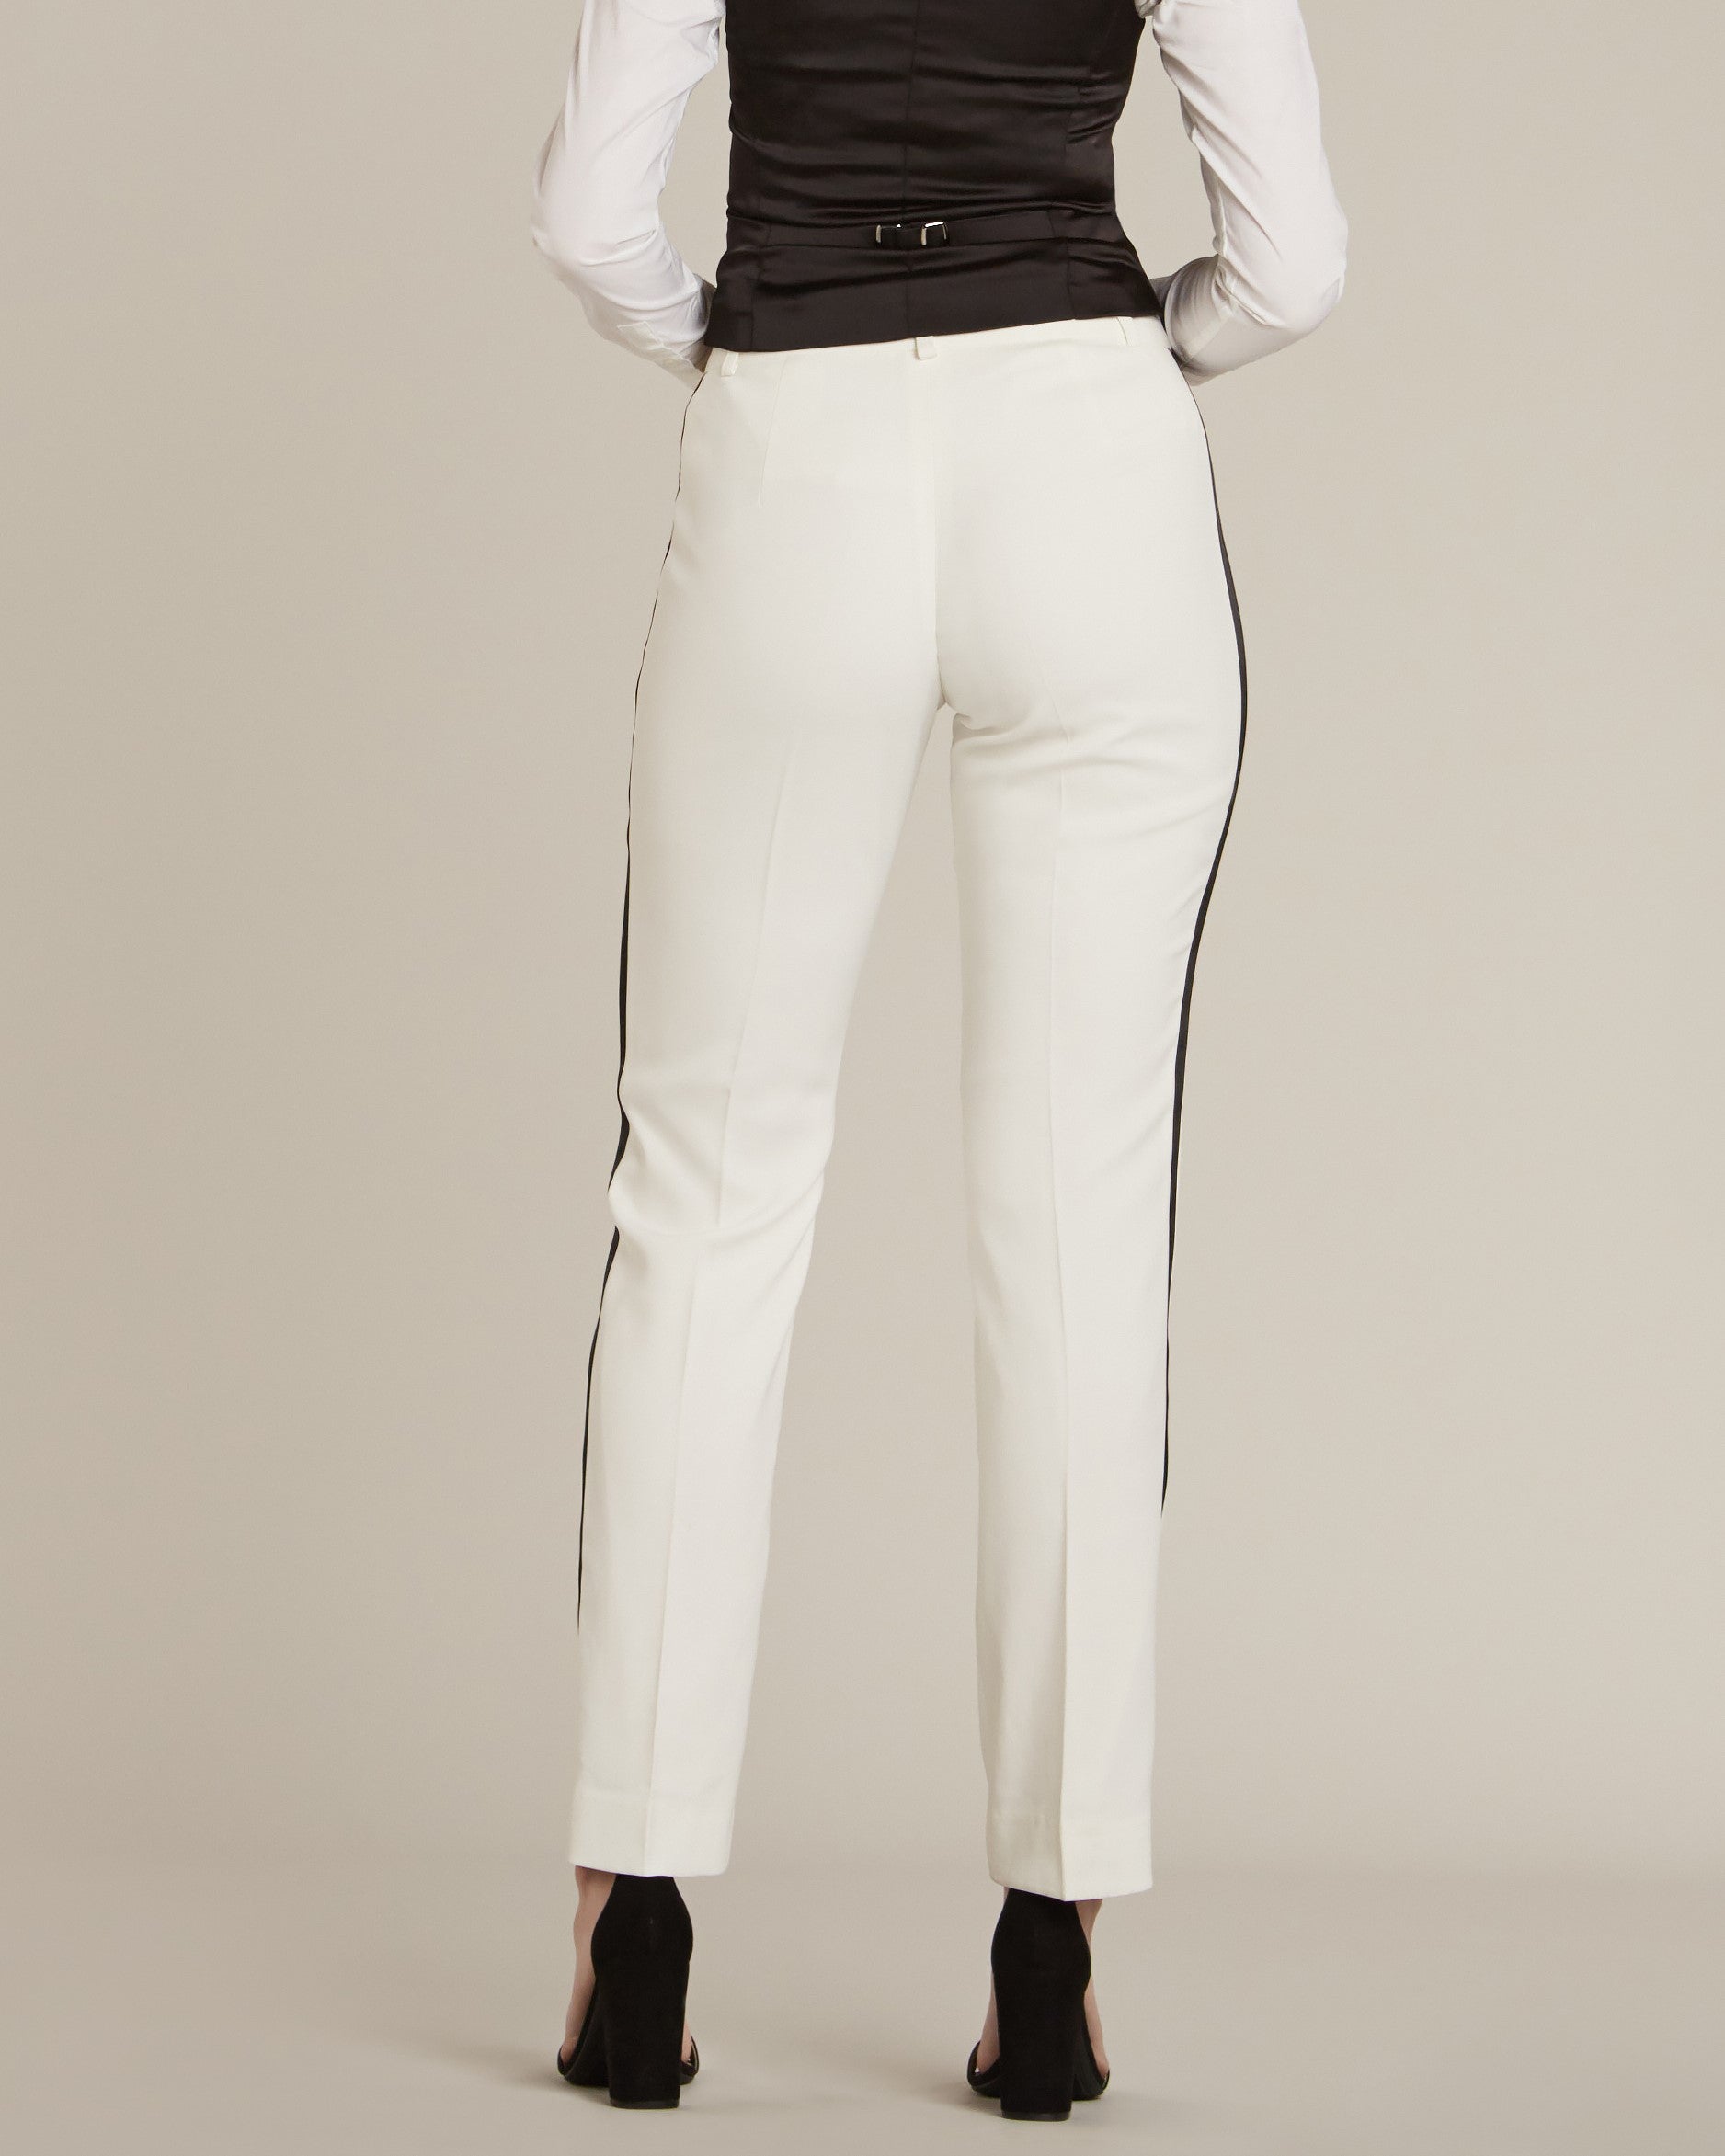 Buy Formal Trouser With Black n White Lining For Men Online @ Best Prices  in India | UNIFORM BUCKET